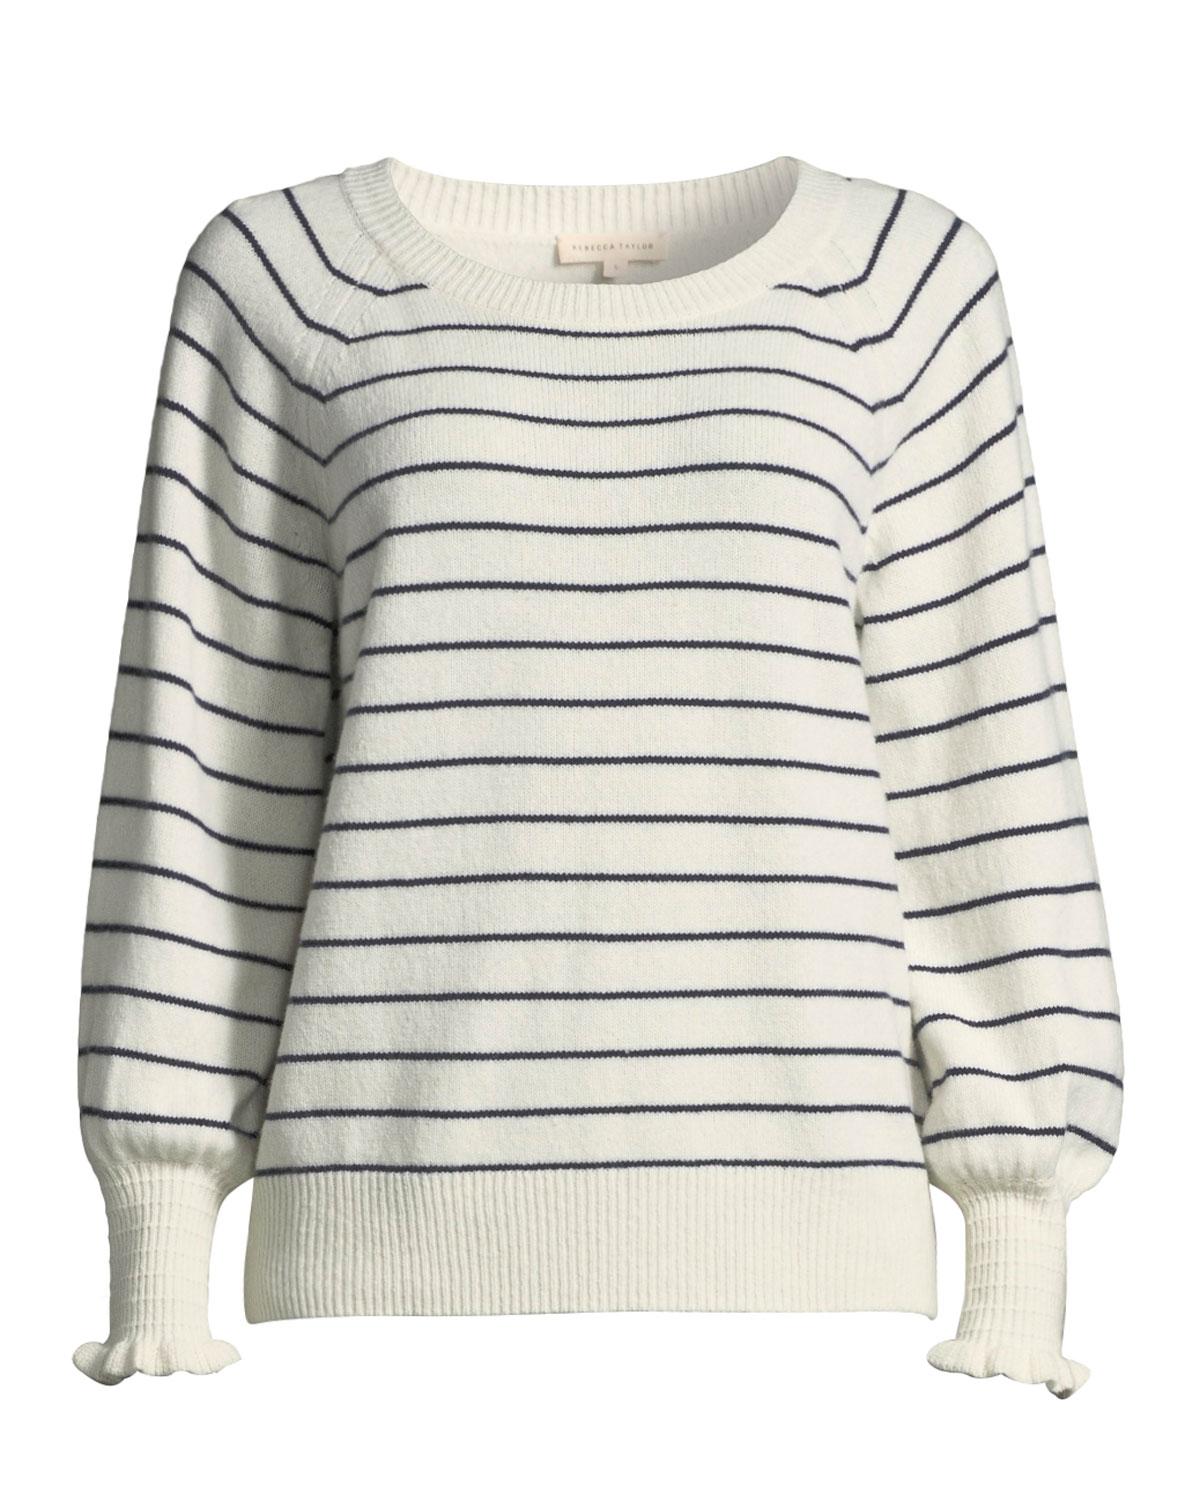 Lyst - Rebecca Taylor Cozy Wool-cotton Striped Sweater in Gray